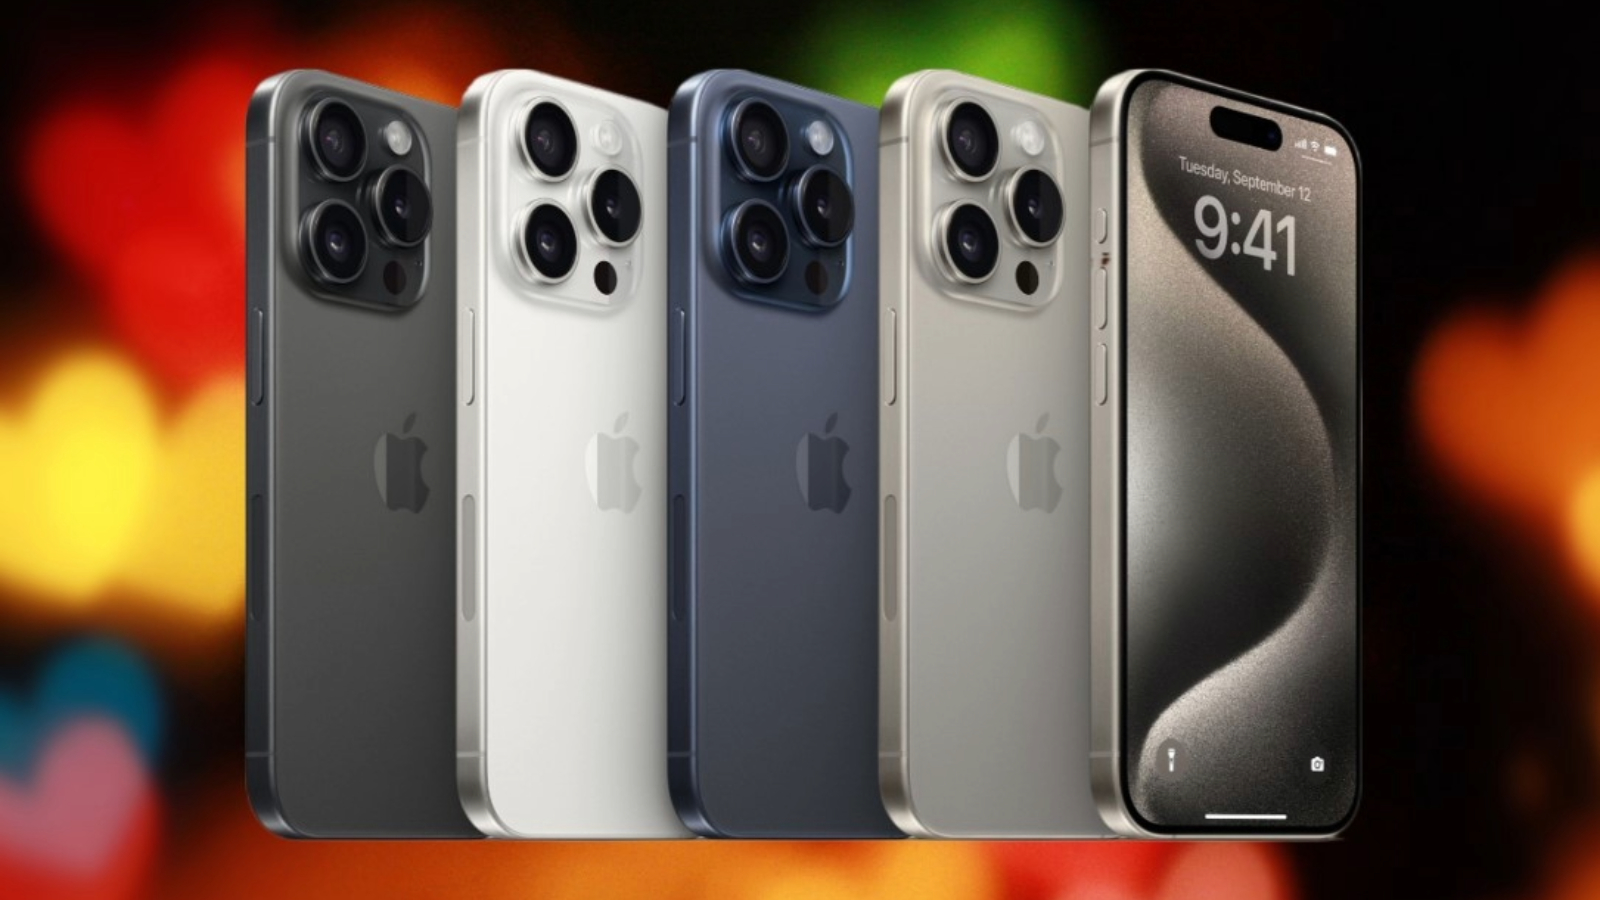 Exclusive: Apple iPhone 16 to Introduce Innovative Camera System with 108MP Sensor and Enhanced Night Mode